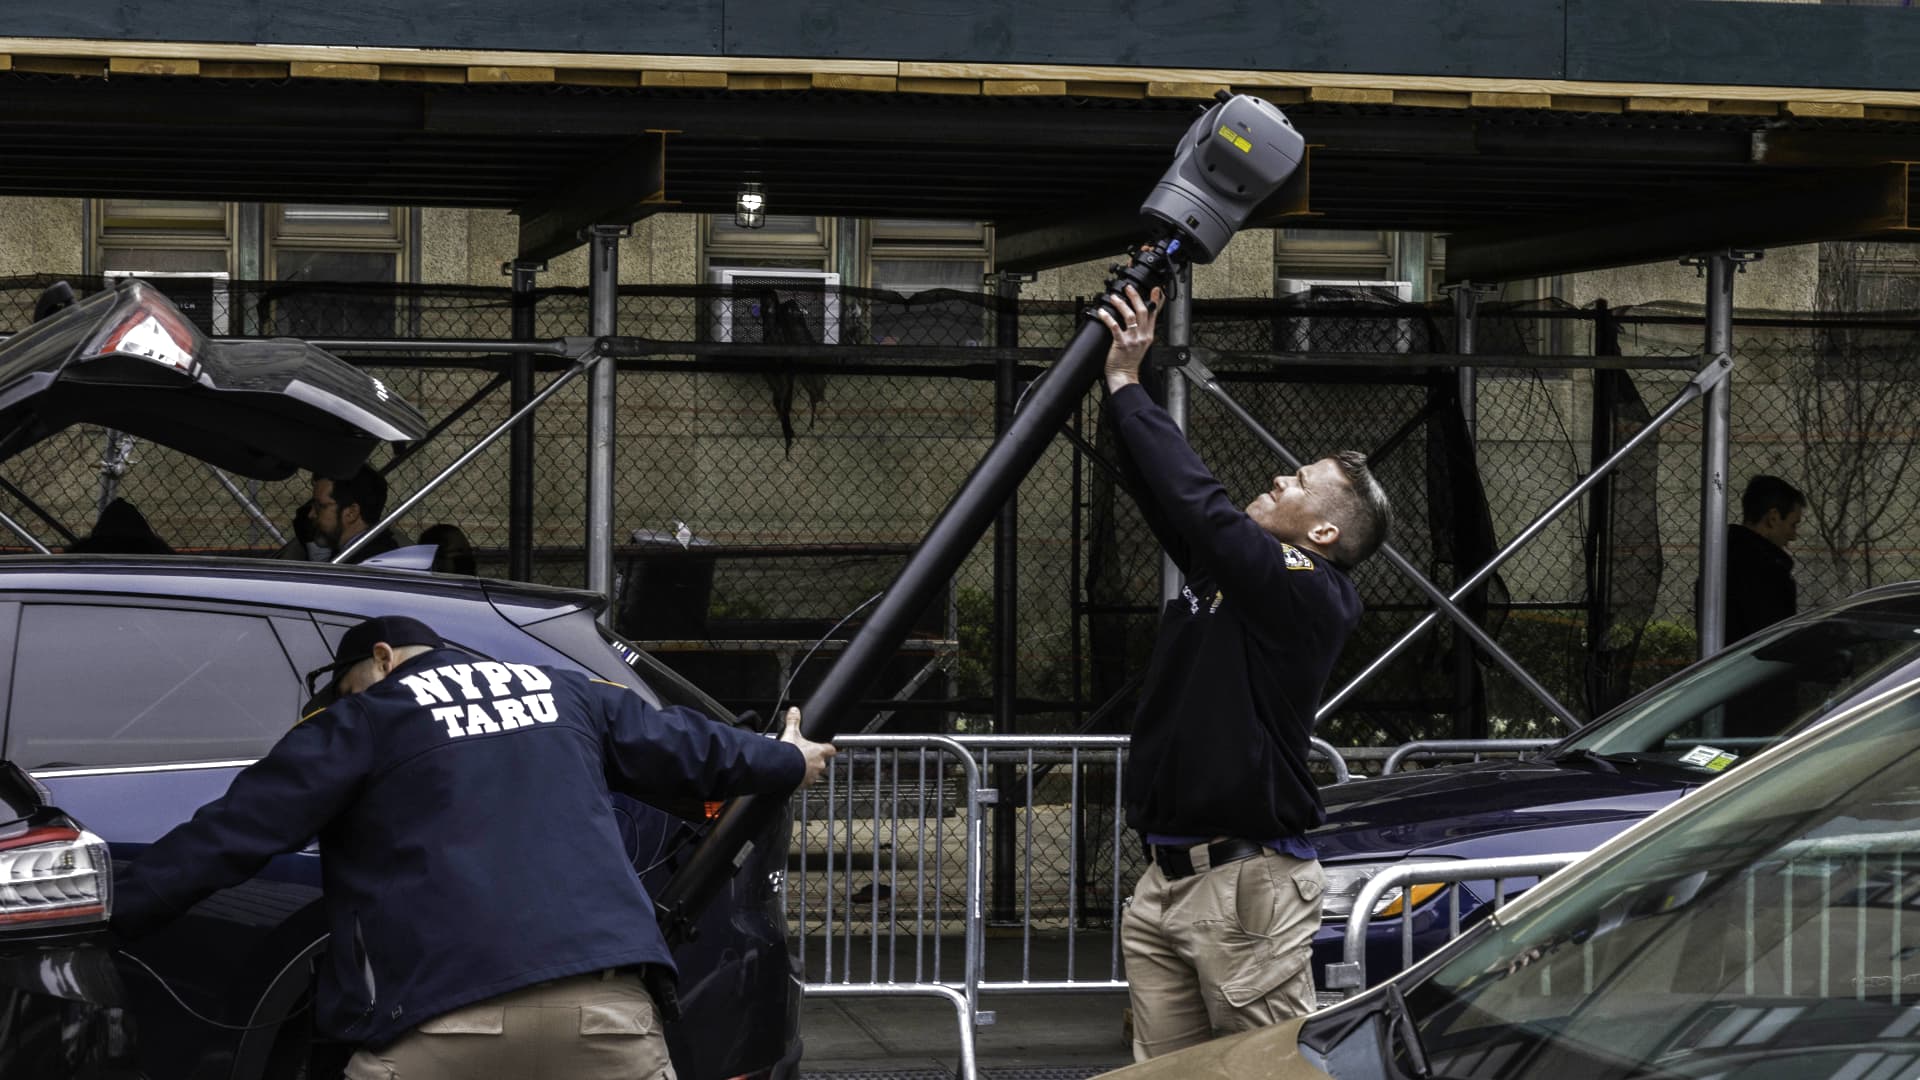 Members of the New York Police Department (NYPD) Technical Assistance Response Unit (TARU) install surveillance equipment outside the criminal courthouse after the indictment of former US President Donald Trump in New York, US, on Friday, March 31, 2023.